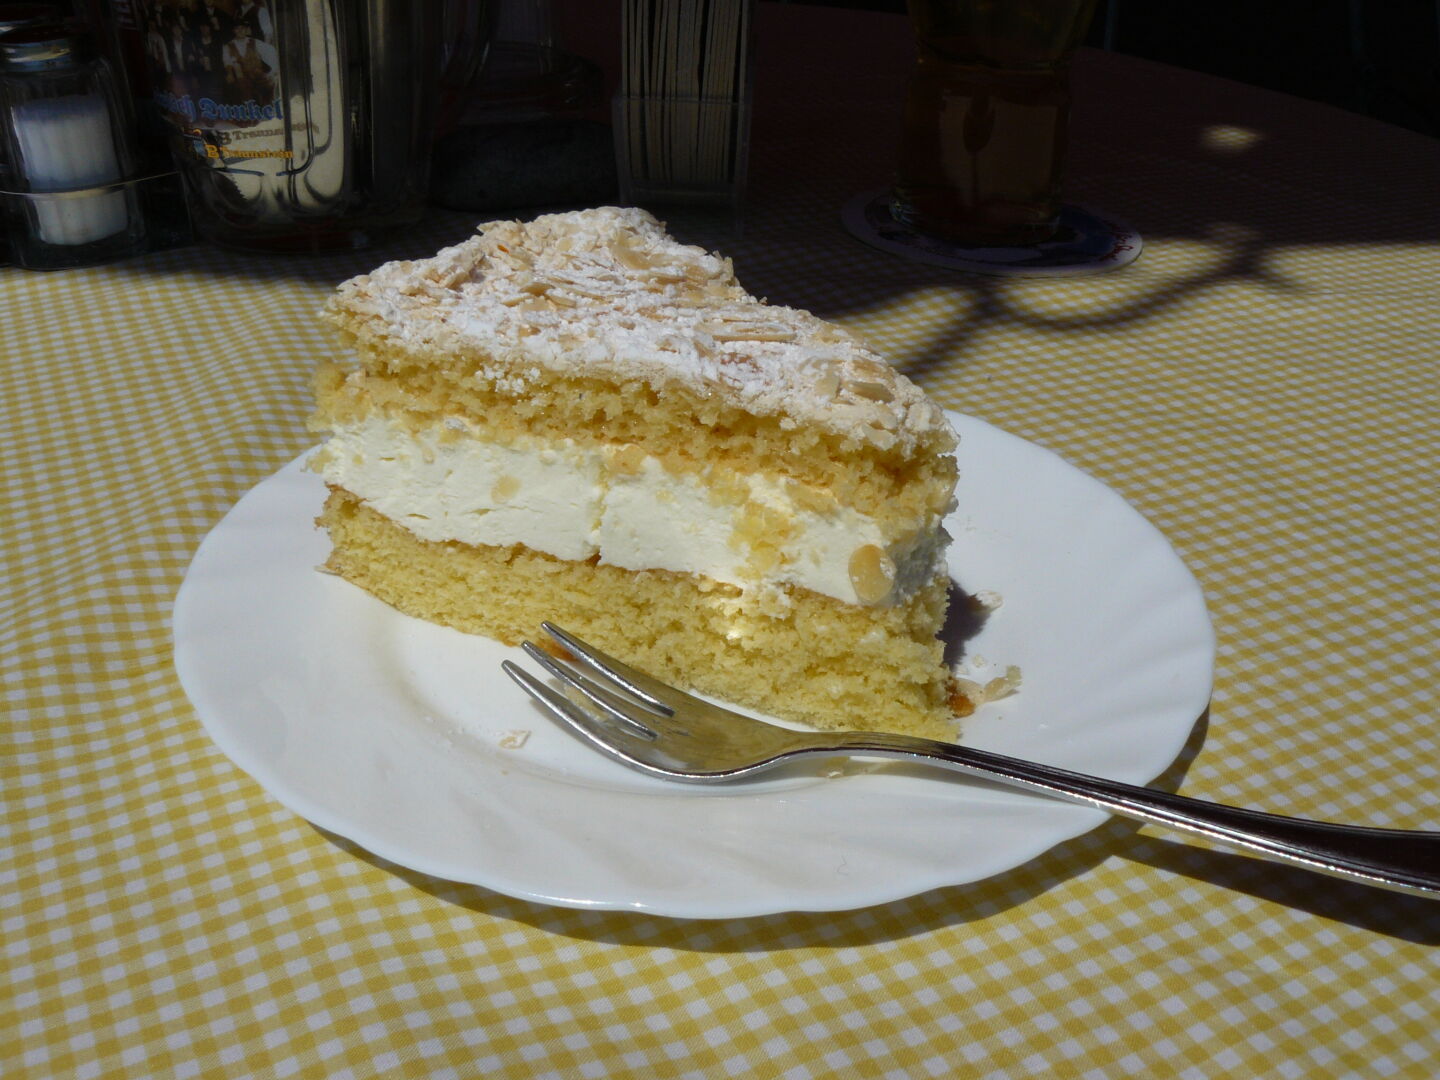 The &quot;heavenly cake&quot; served at Jaudenstadl alp.